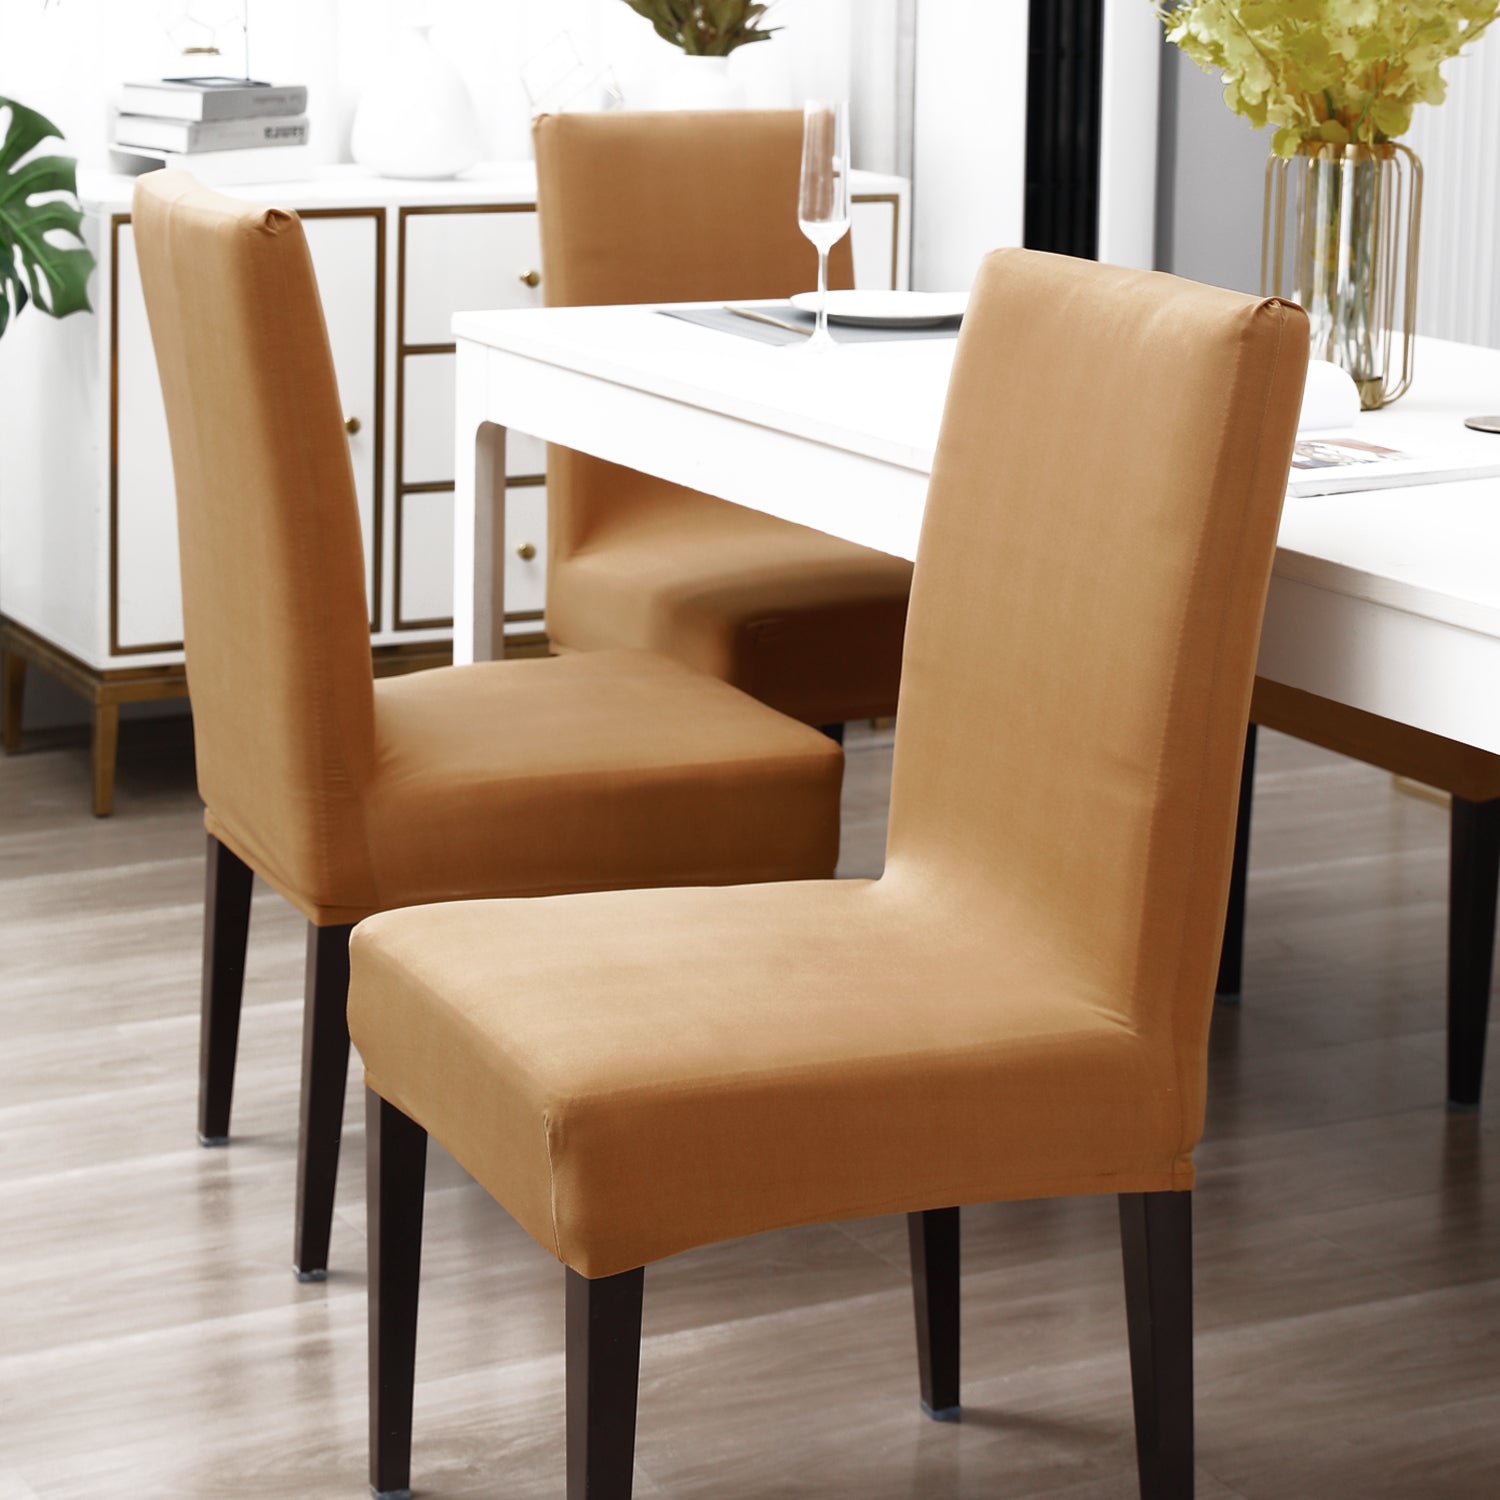 Elastic Stretchable Dining Chair Cover, Sand Brown